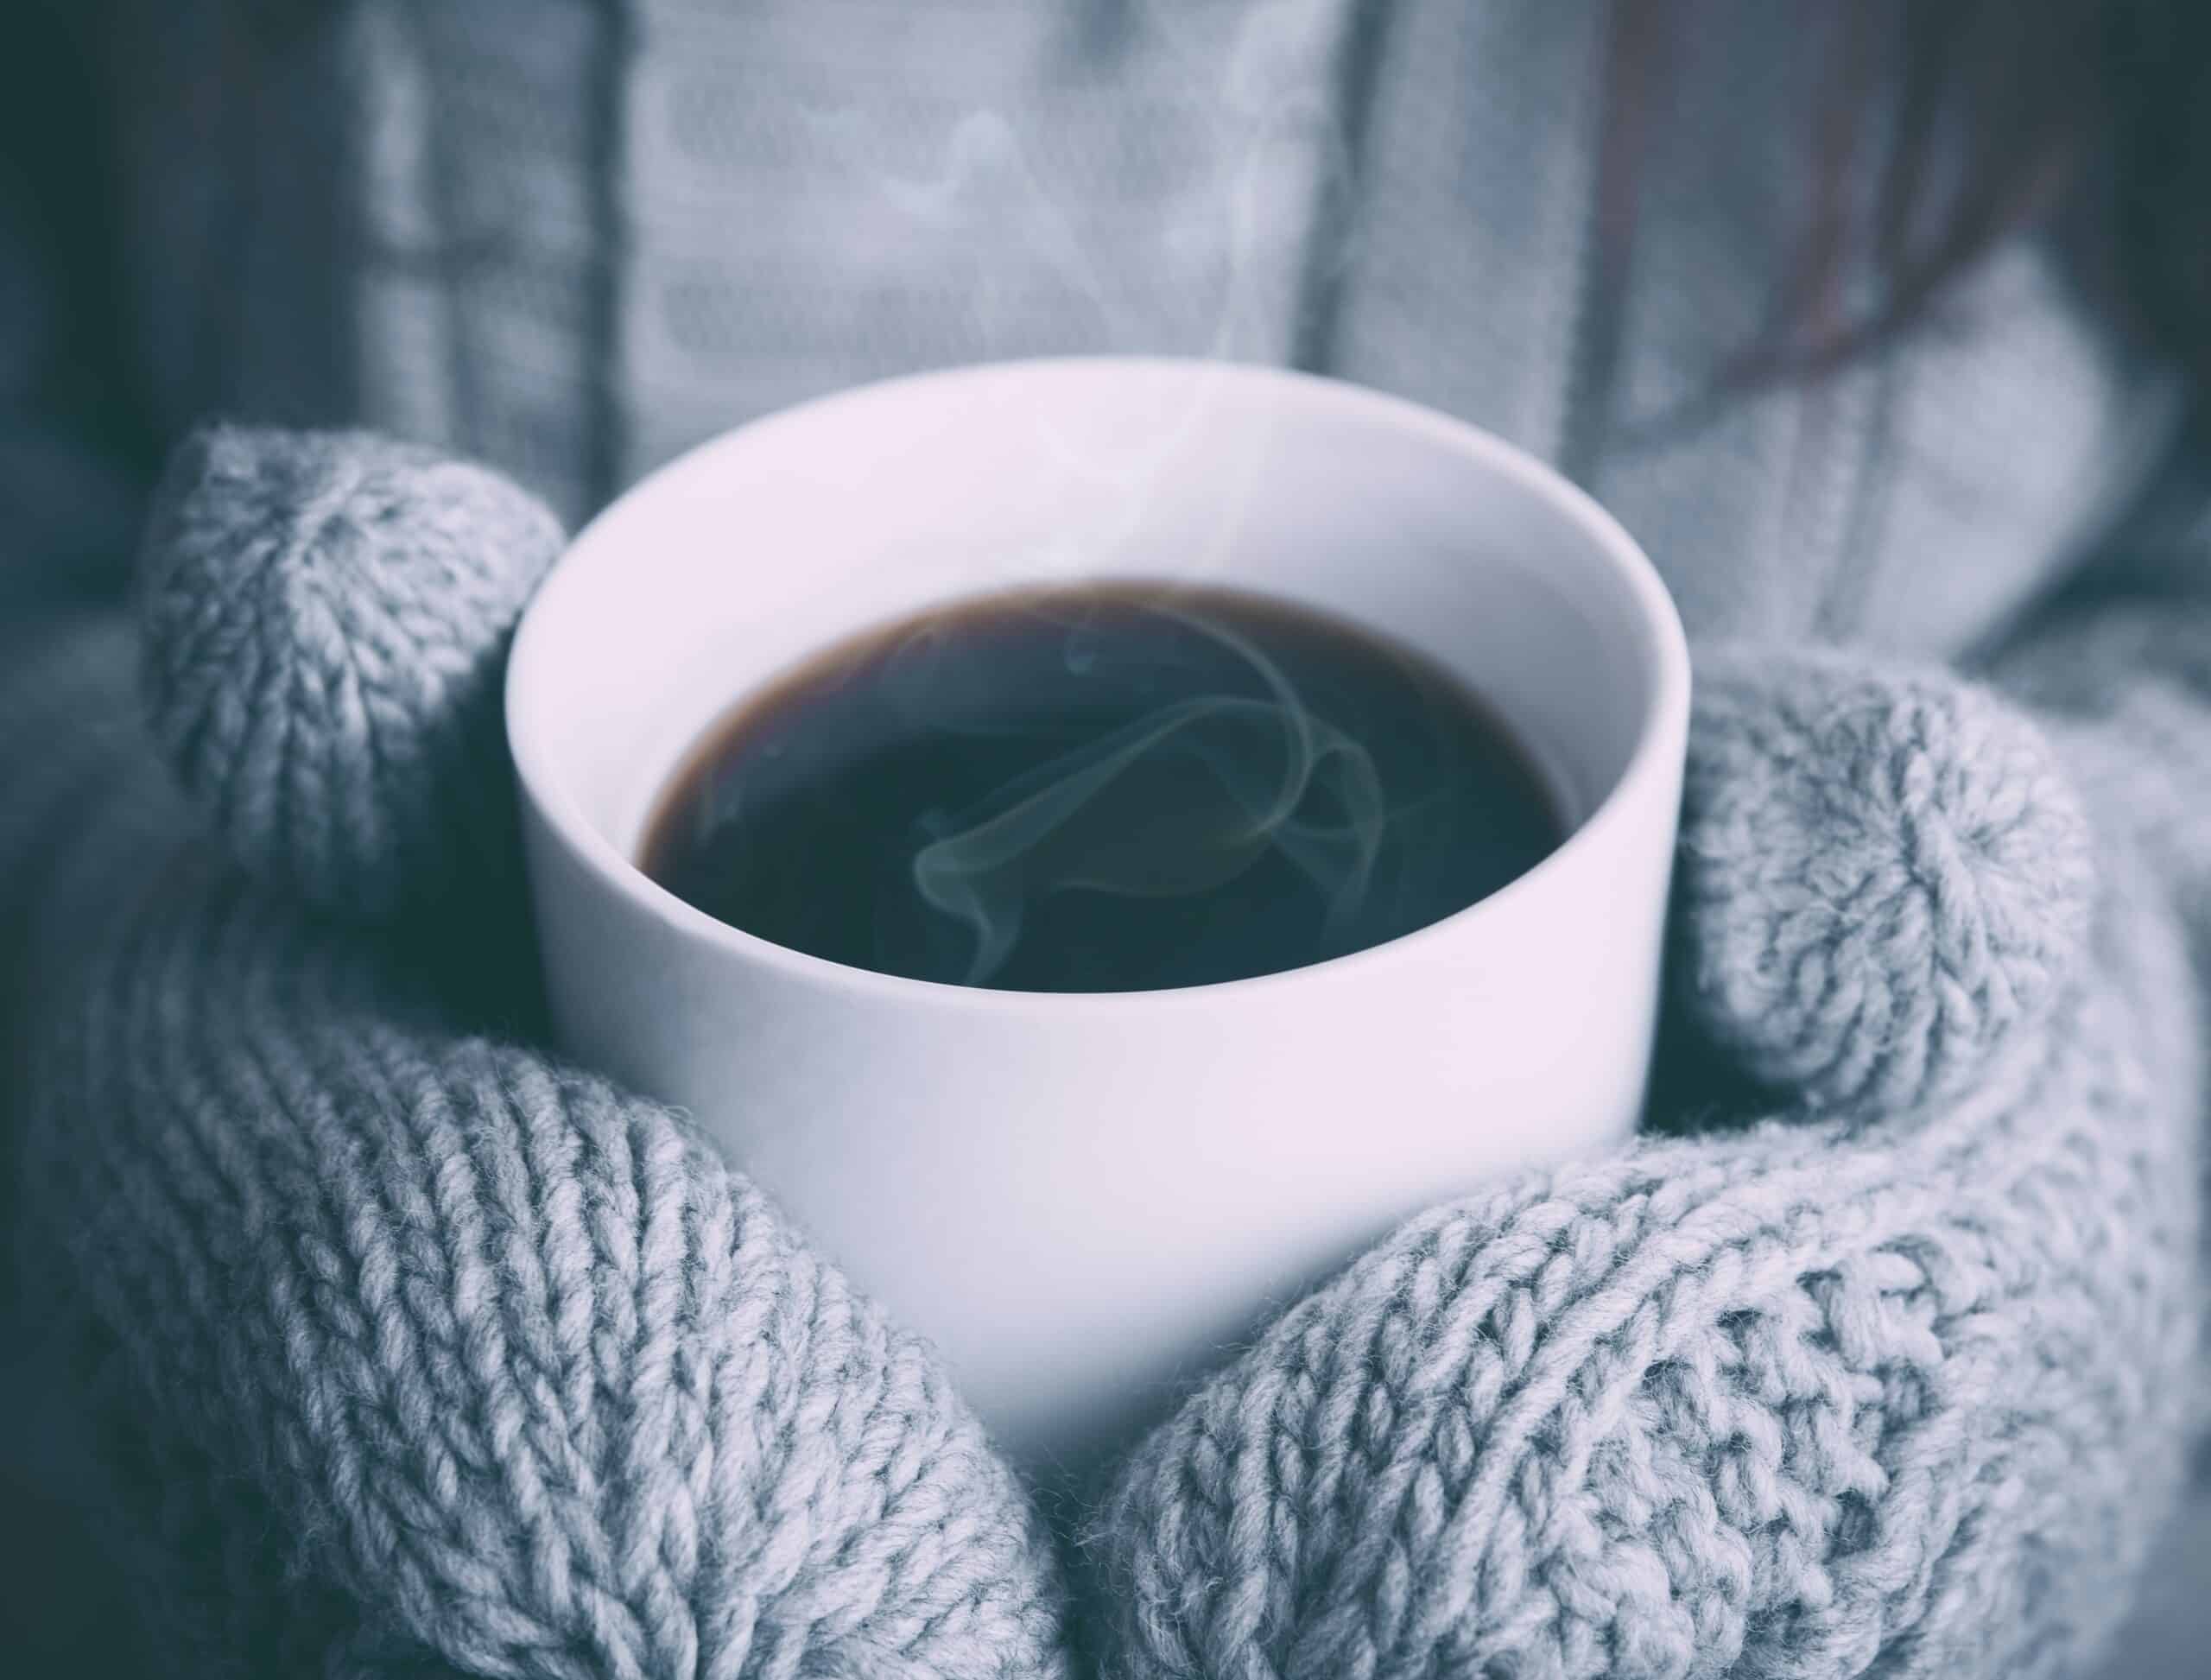 Two mitten hands holding a steaming cup of coffee